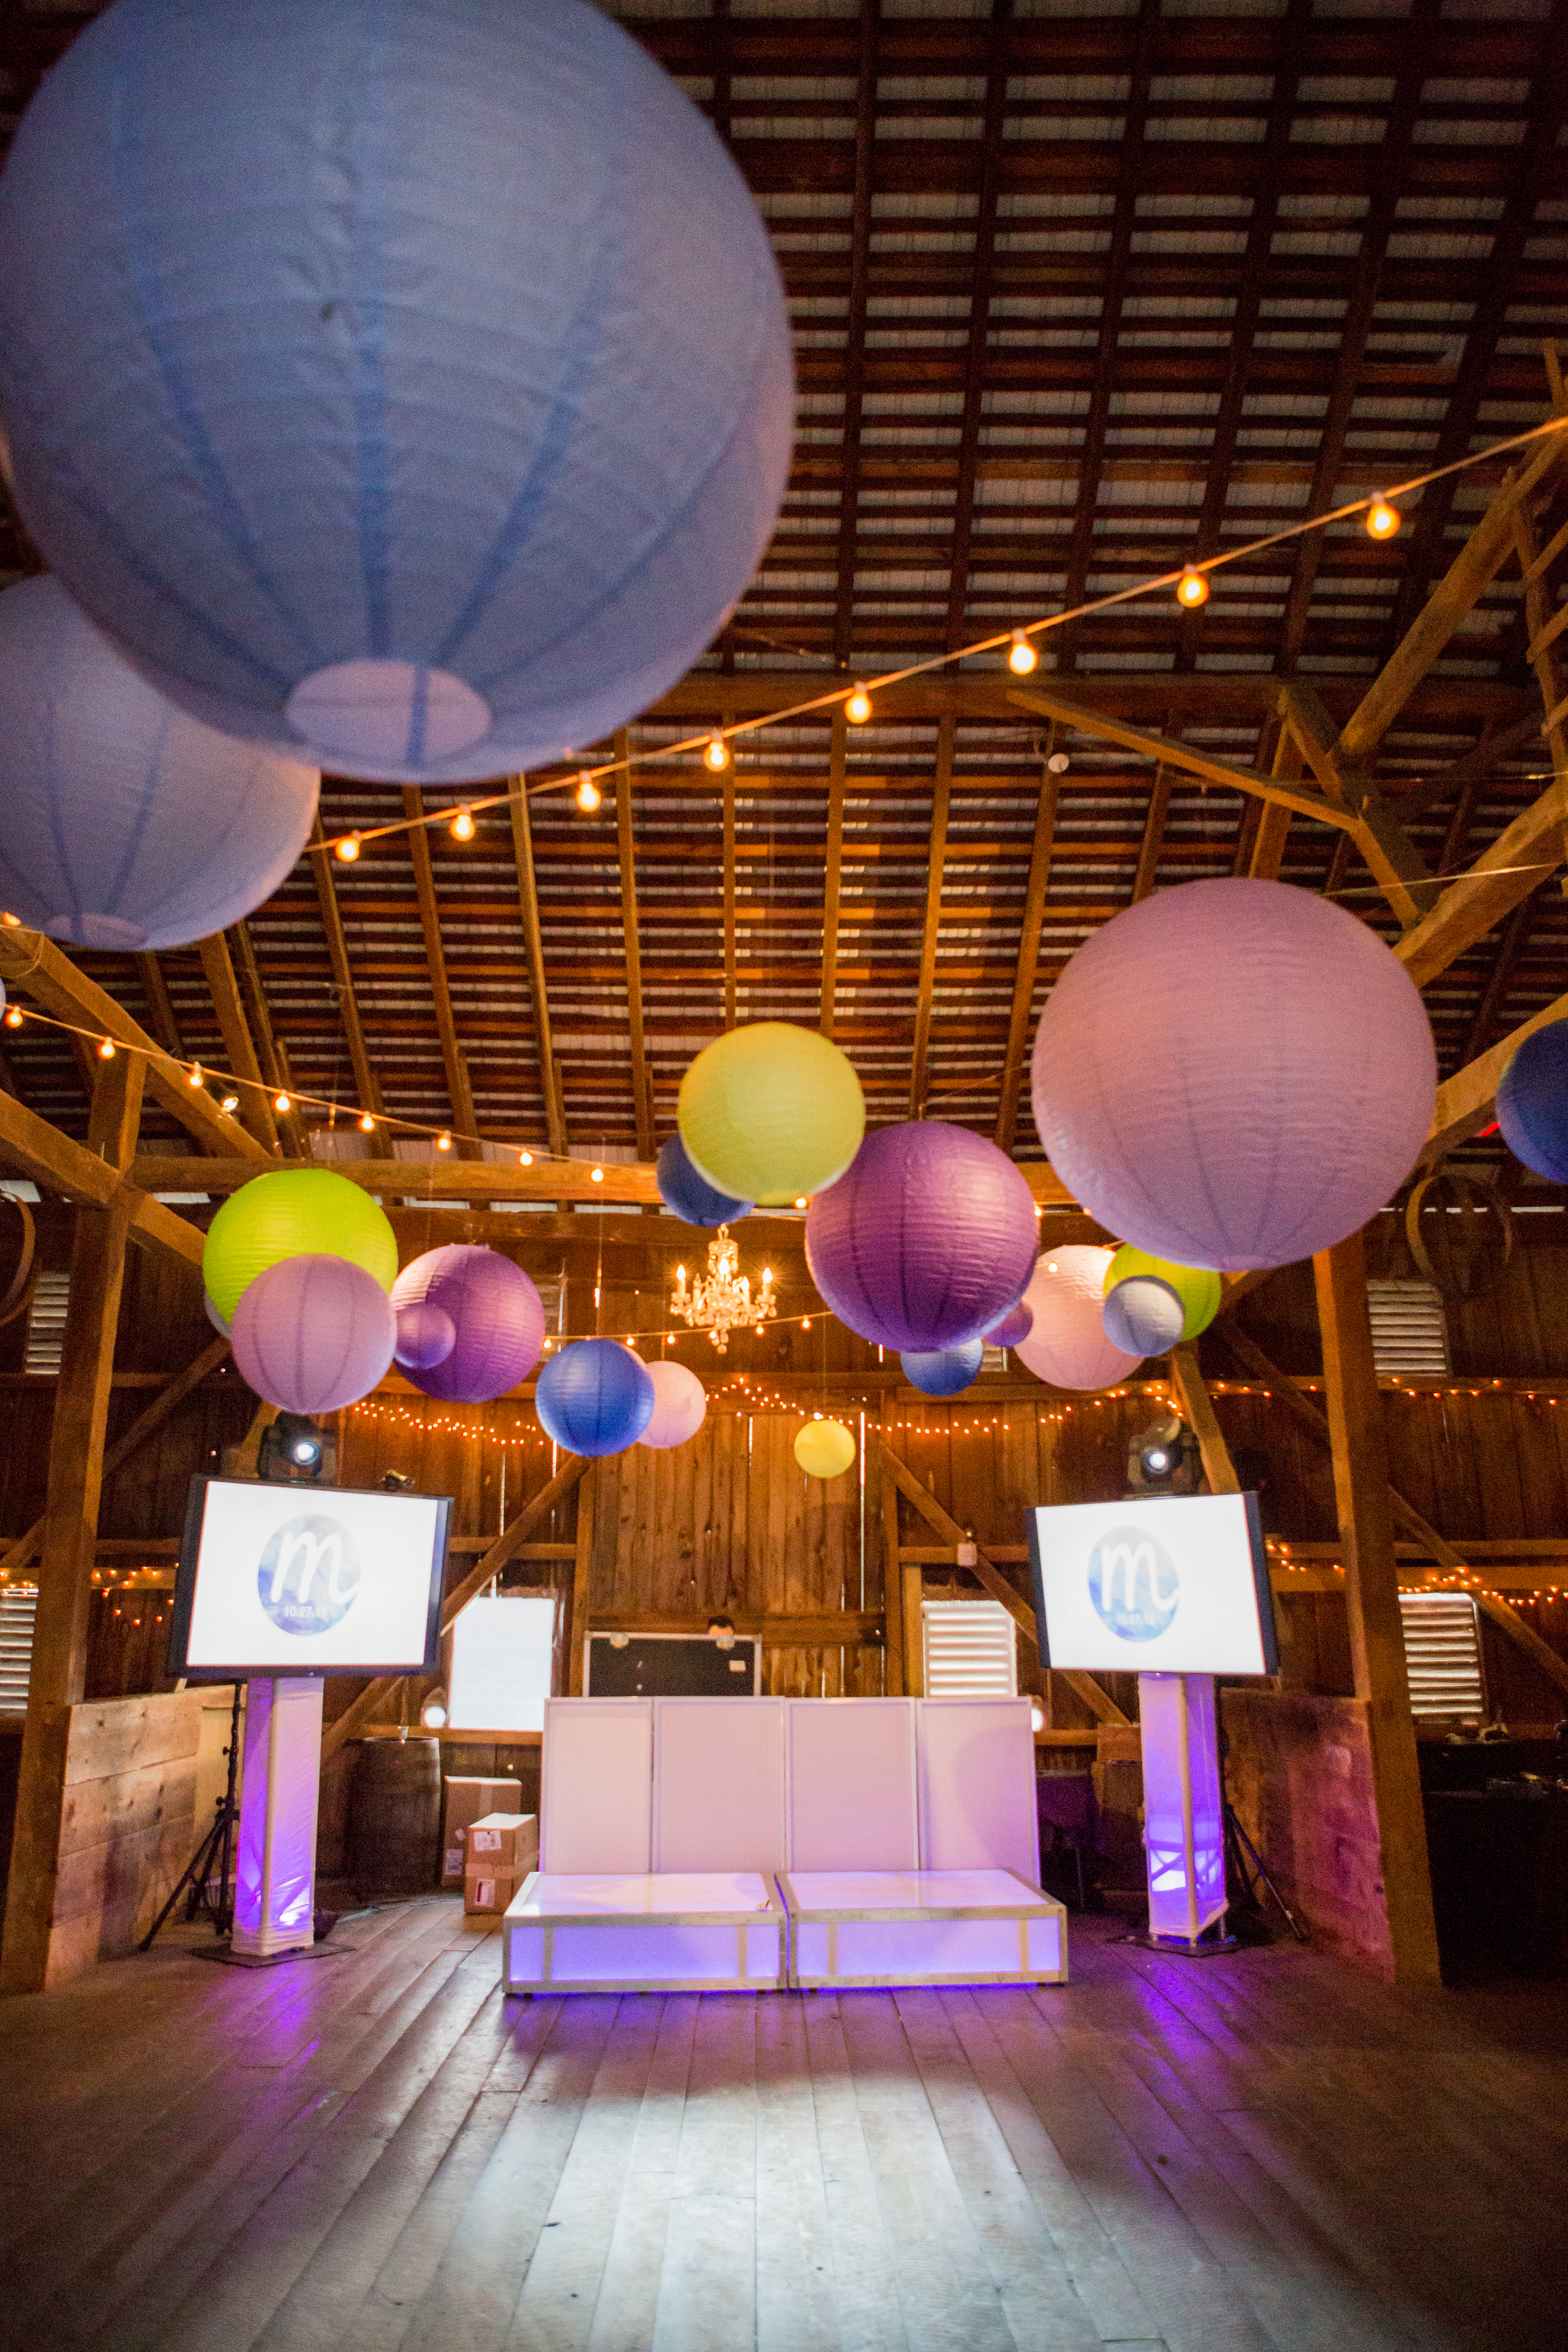 DJ set up with paper lanterns and string lights at Maddie's Rustic Pink and purple Bat Mitzvah at Rocklands Farms in Poolsville, MD | Pop Color Events | Adding a Pop of Color to Bar & Bat Mitzvahs in DC, MD, and VA | Photo by Jessica Latos Photography